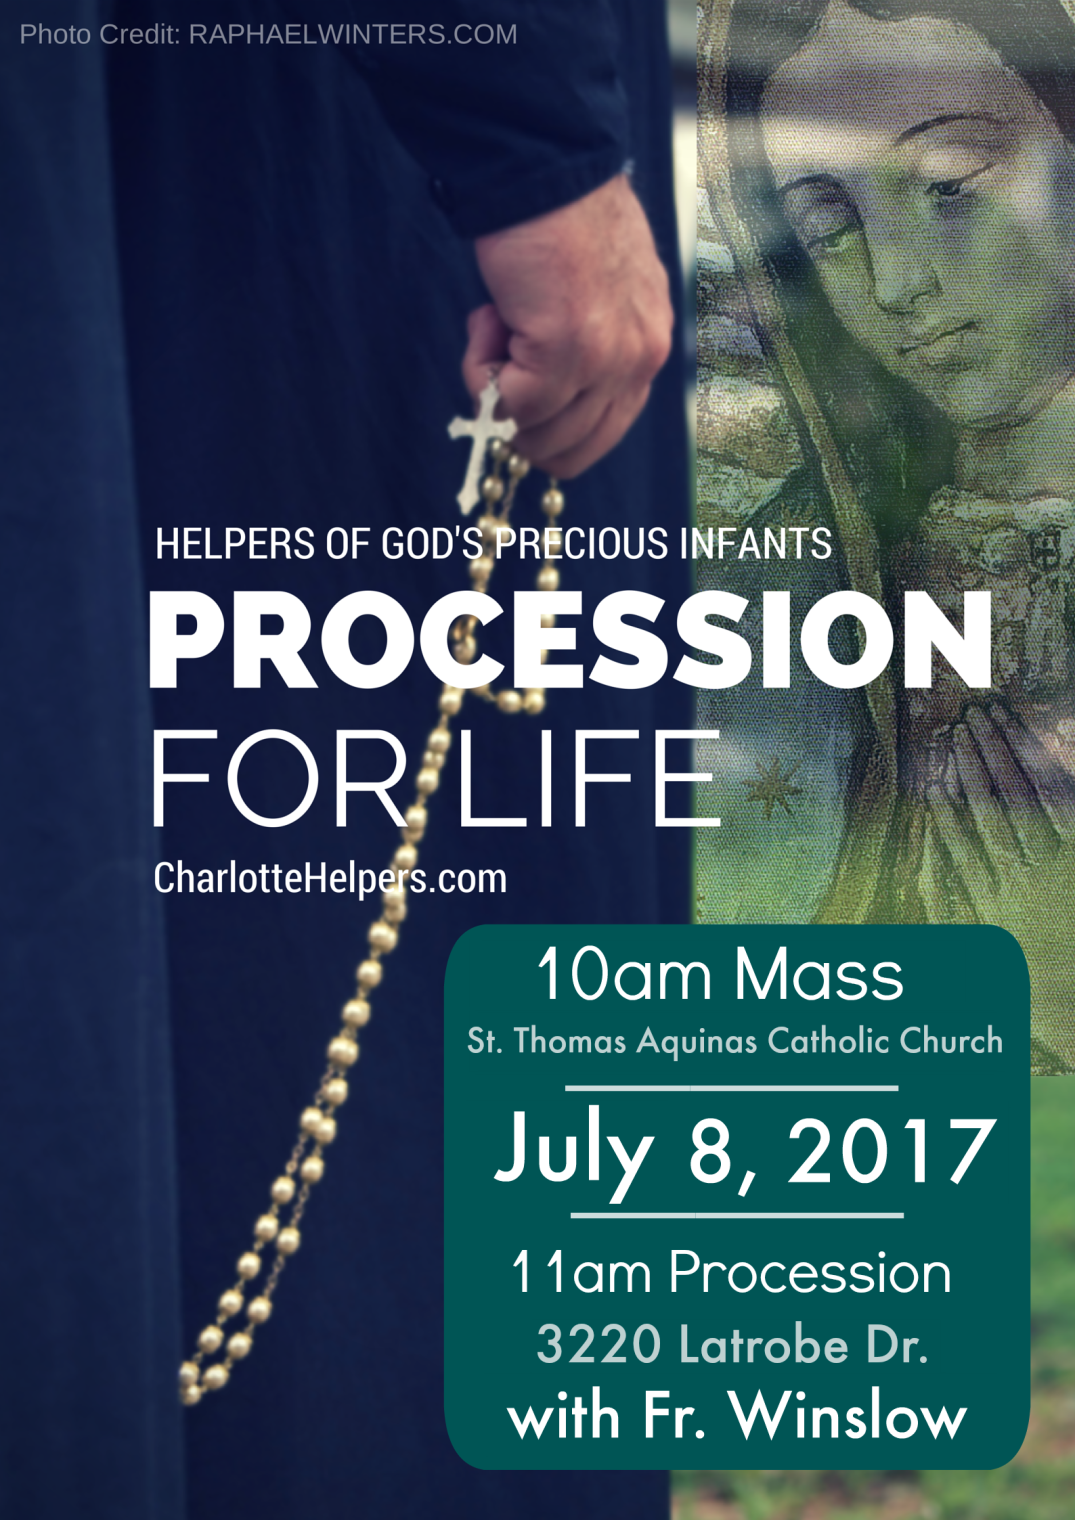 July 8, 2017 Procession for Life